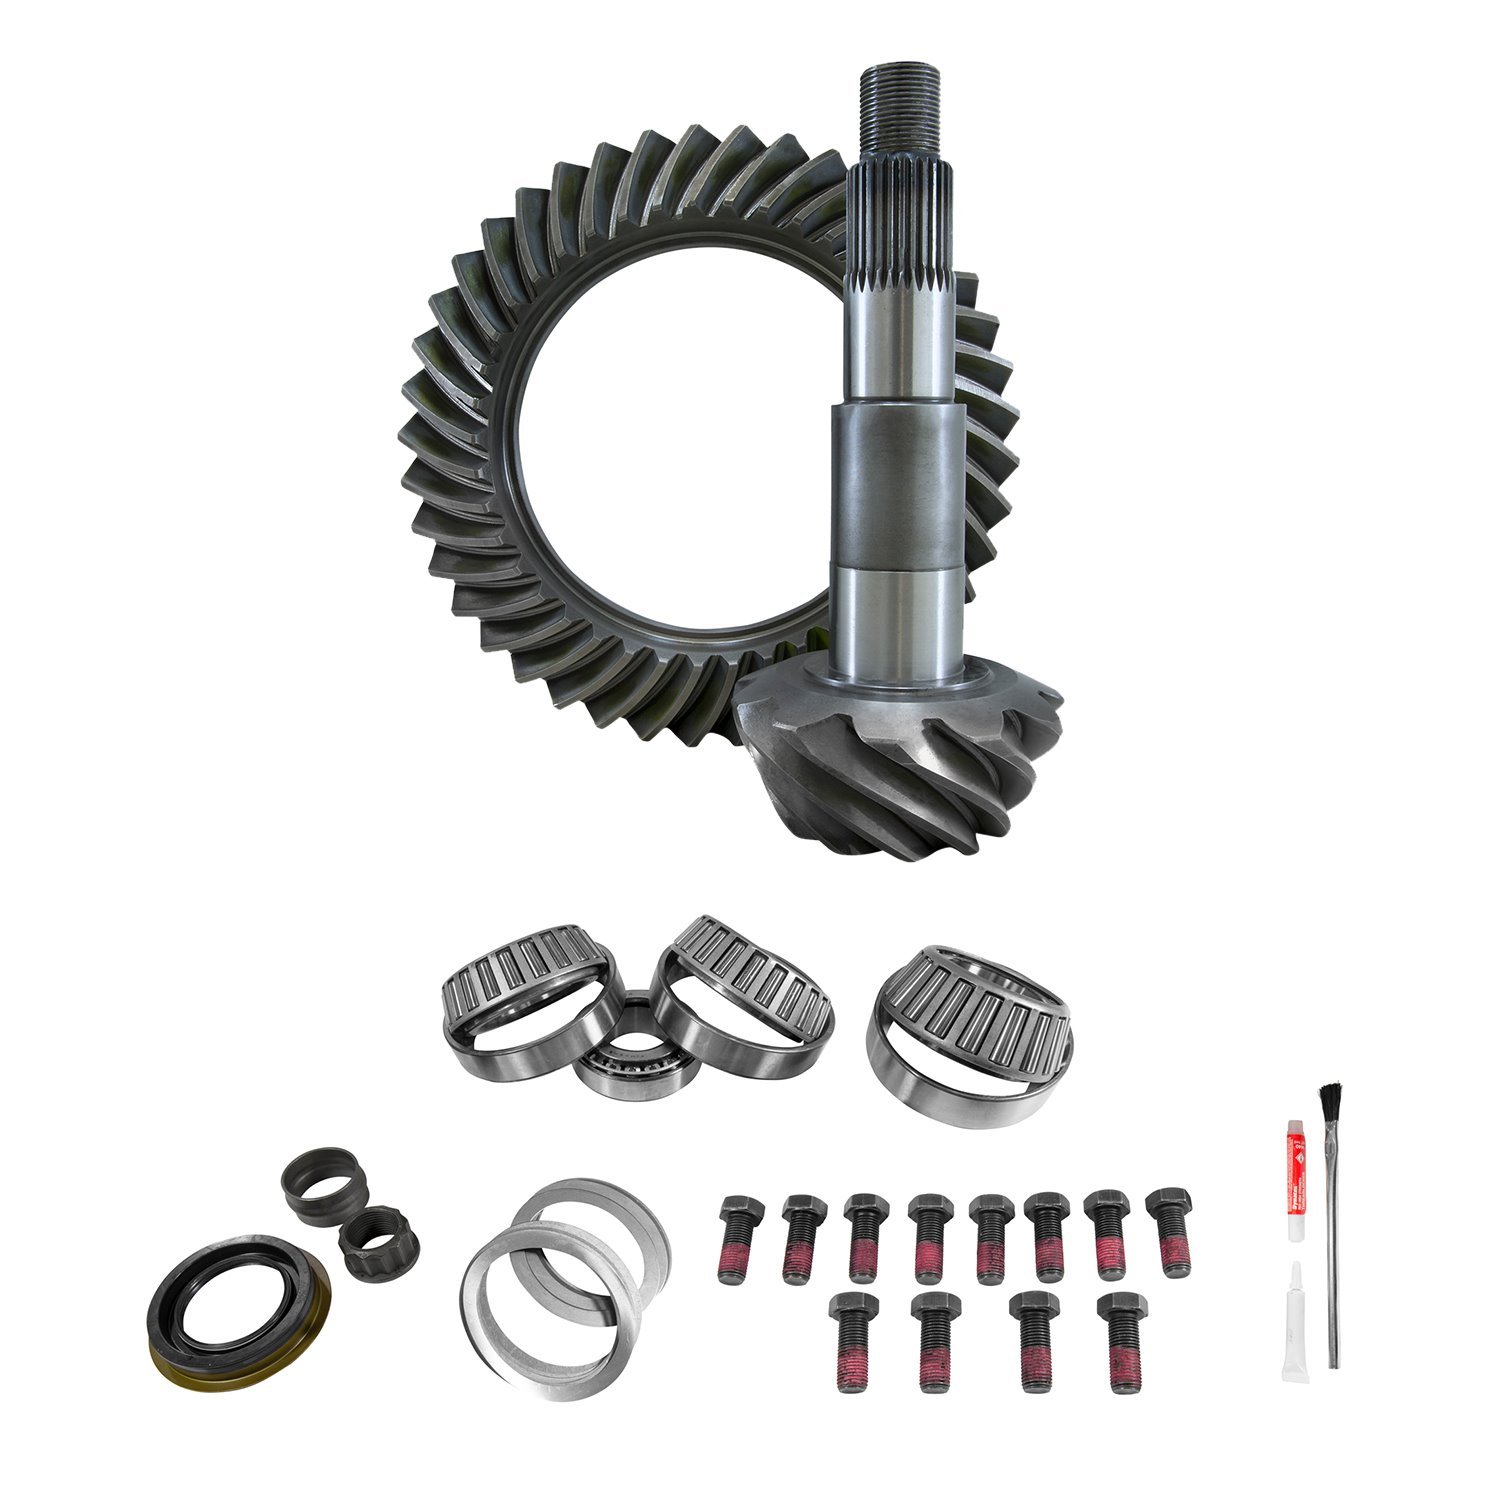 AAM115B1003 Ring & Pinion w/Installation Kit Bundle for 2001-2010 GM, Dodge 2500, 3500 Trucks 11.5 AAM Differential [3.73 Ratio]